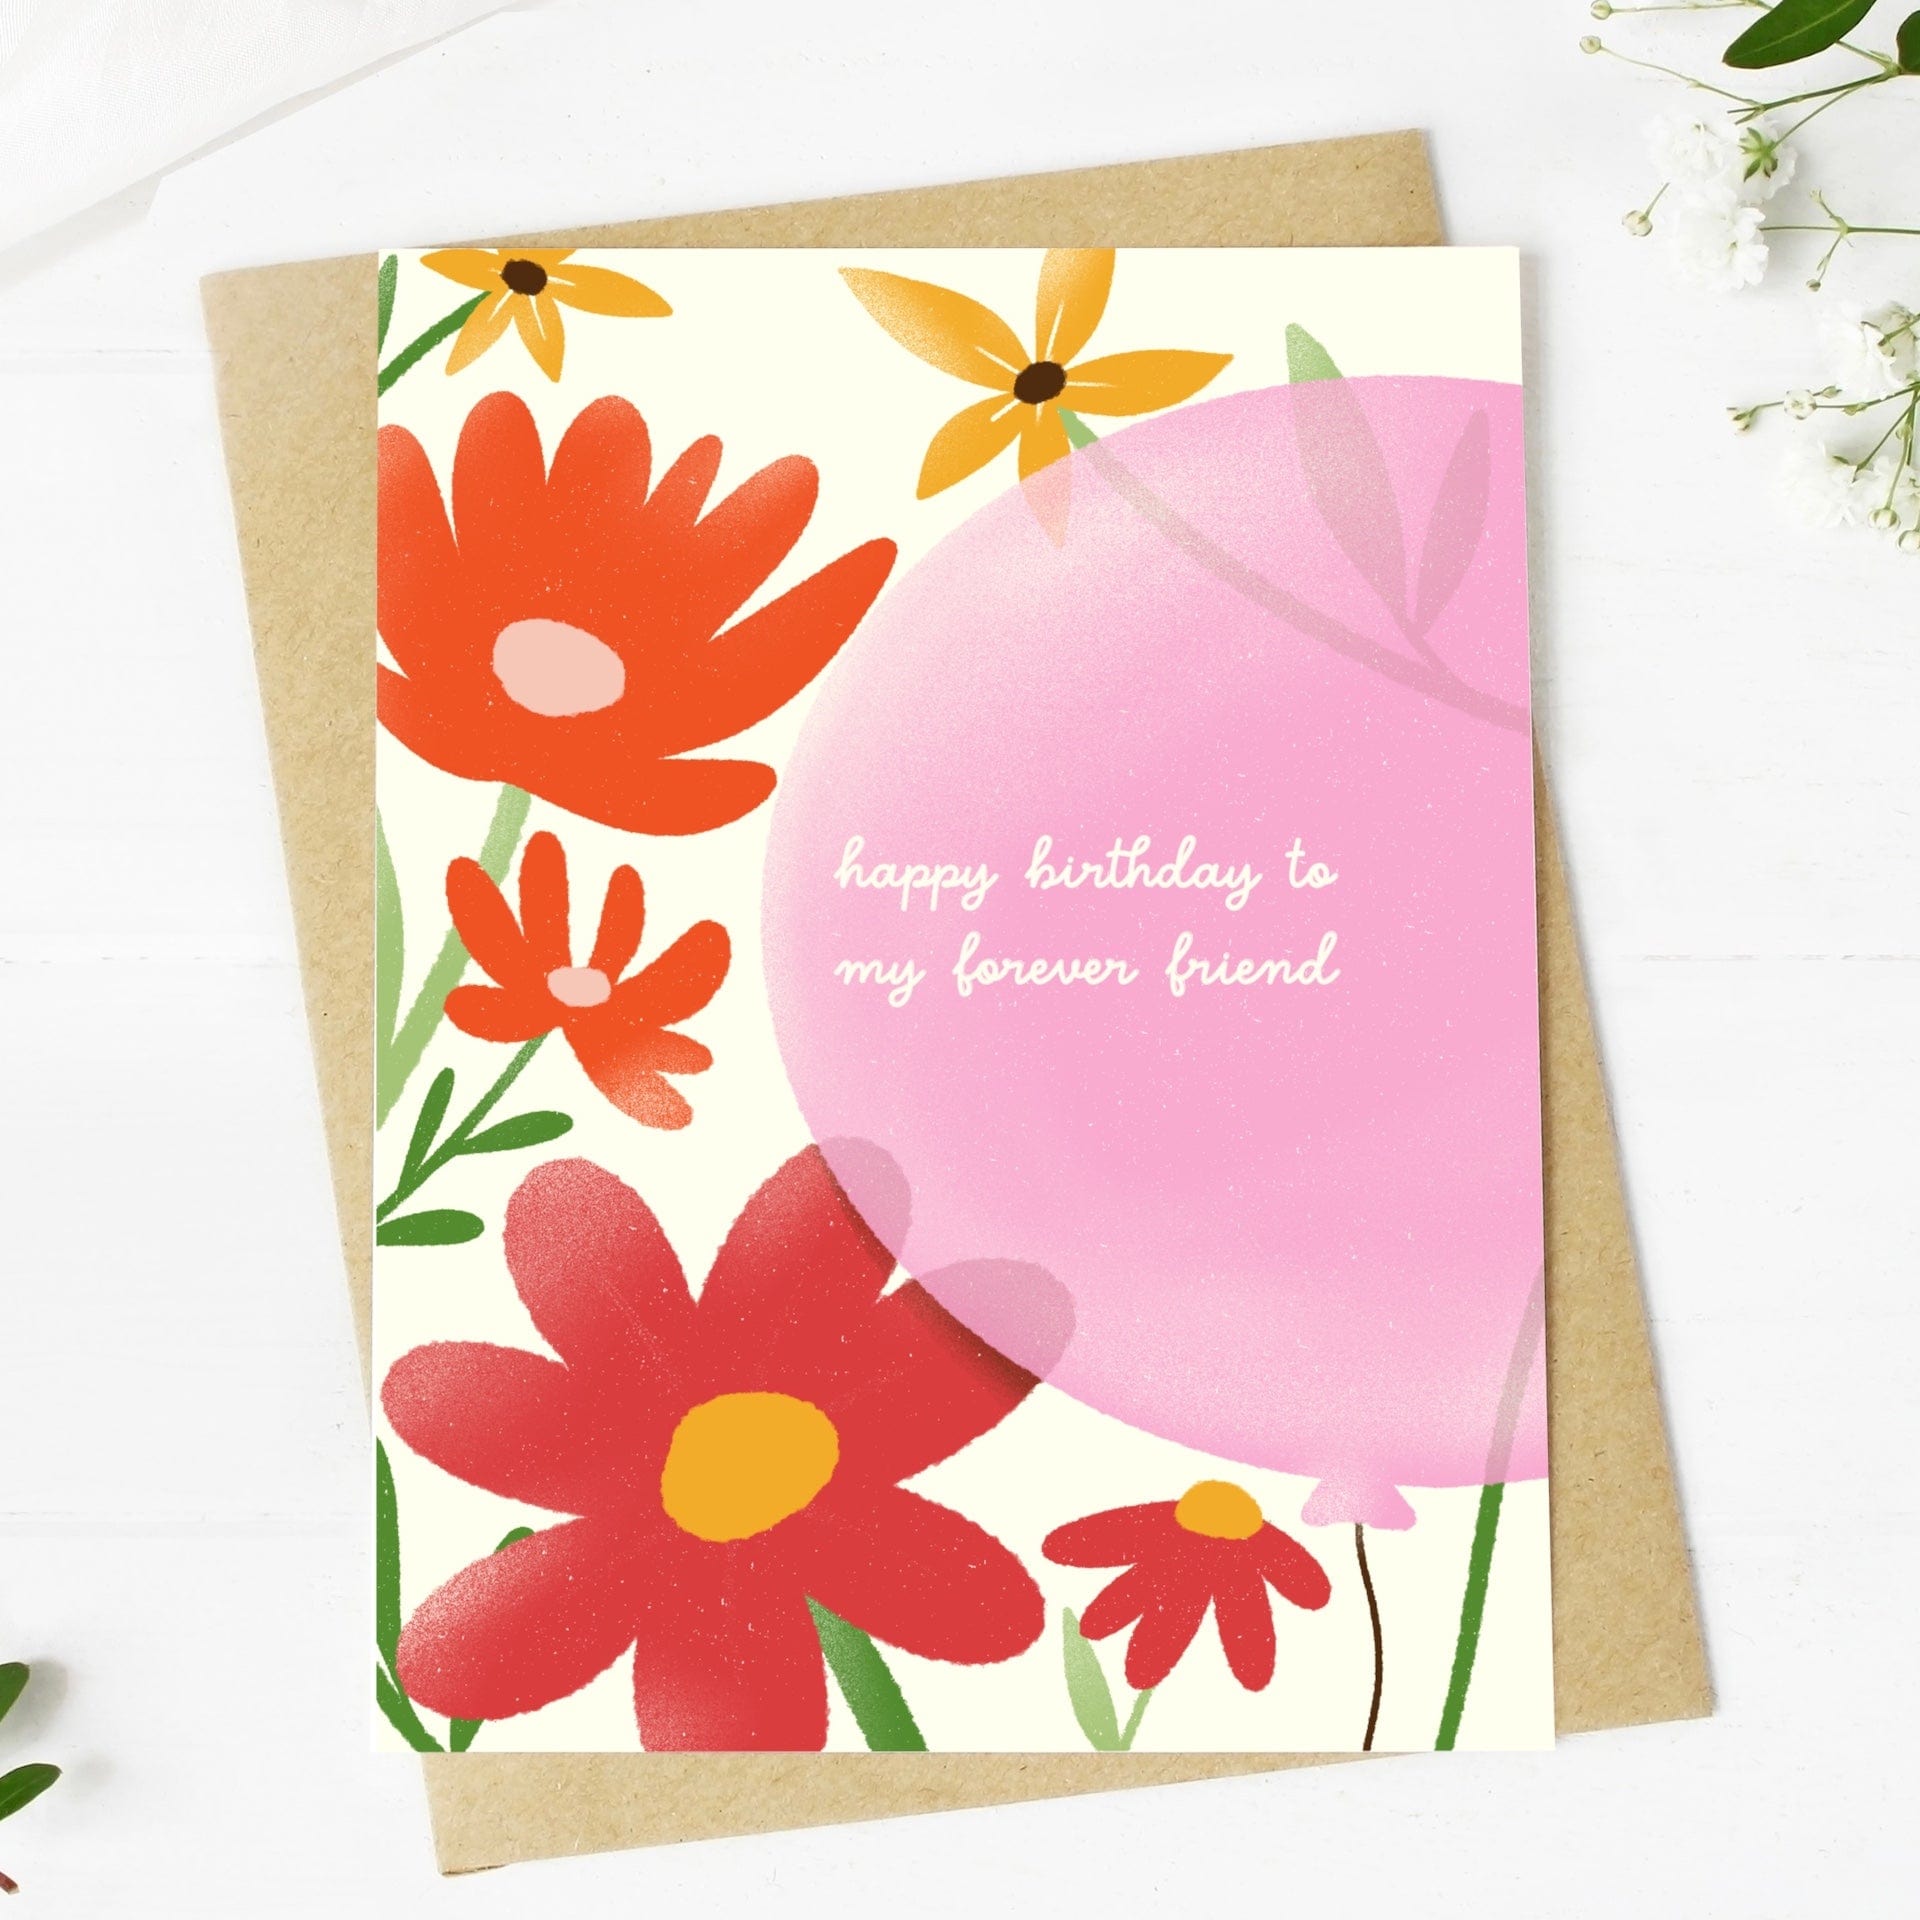 how to make birthday greeting cards for friends